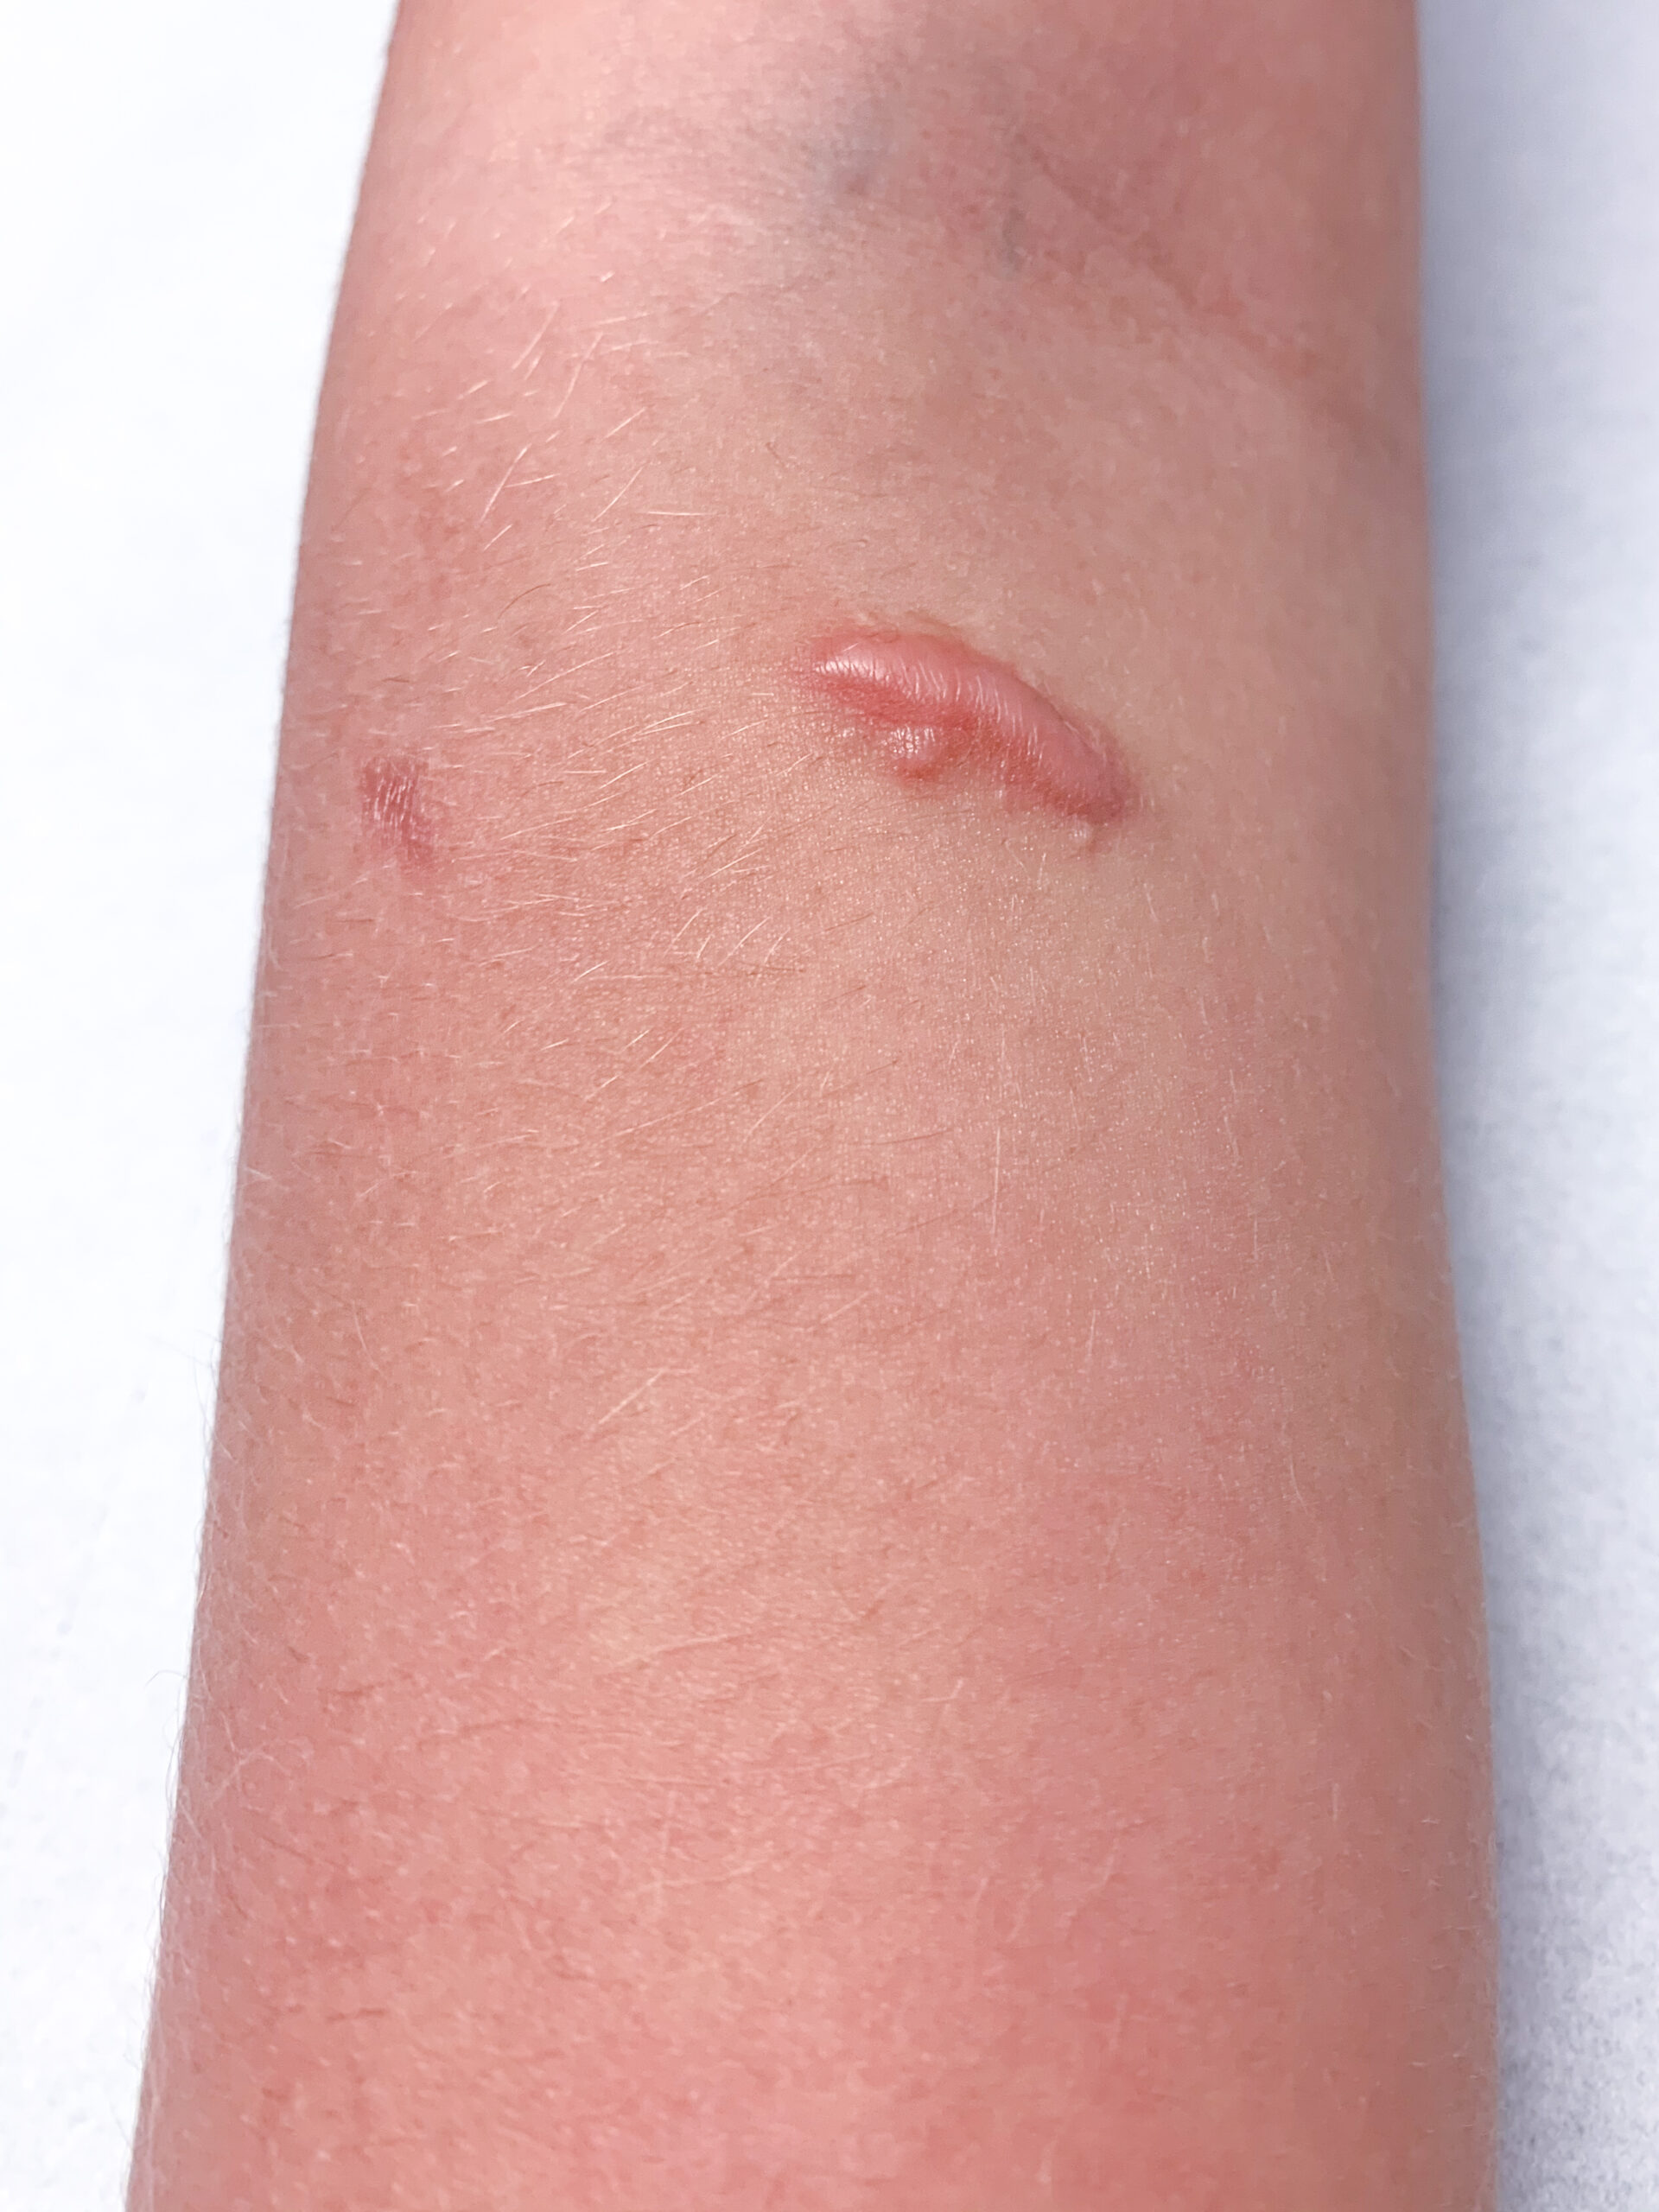 Photo of a small keloid on the arm